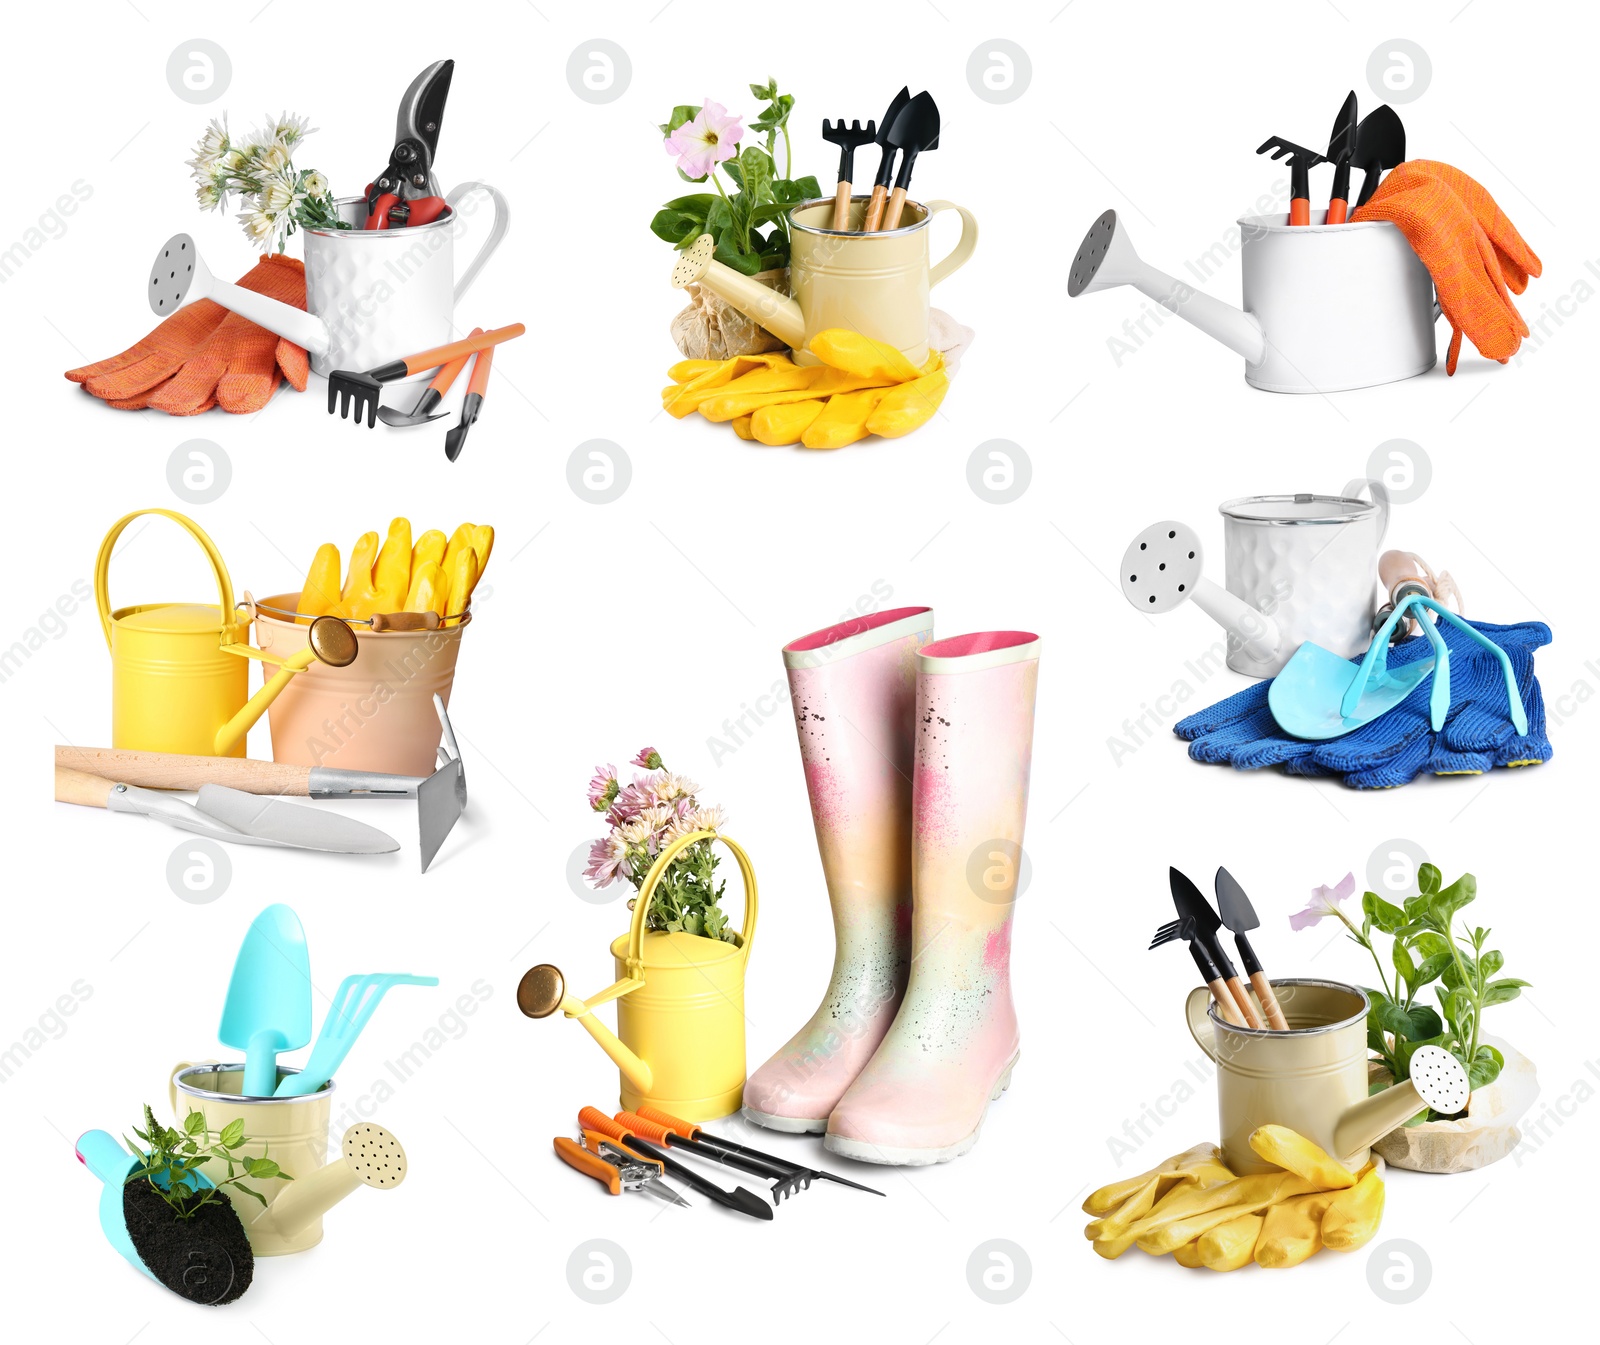 Image of Set with watering cans and different gardening tools on white background